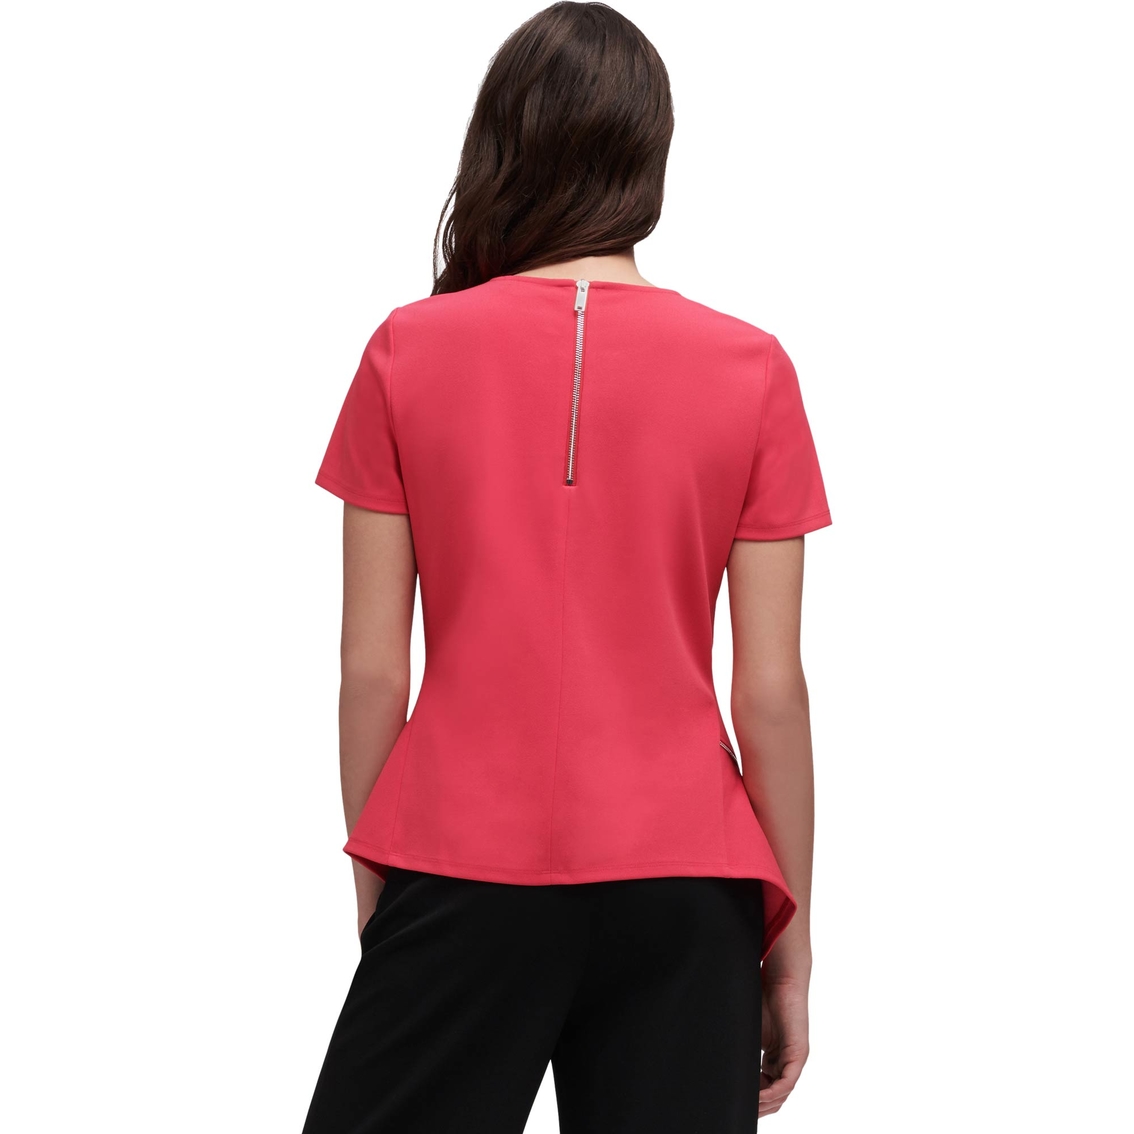 DKNY by Donna Karan Crewneck Asymmetrical Top with Zip Details - Image 2 of 2